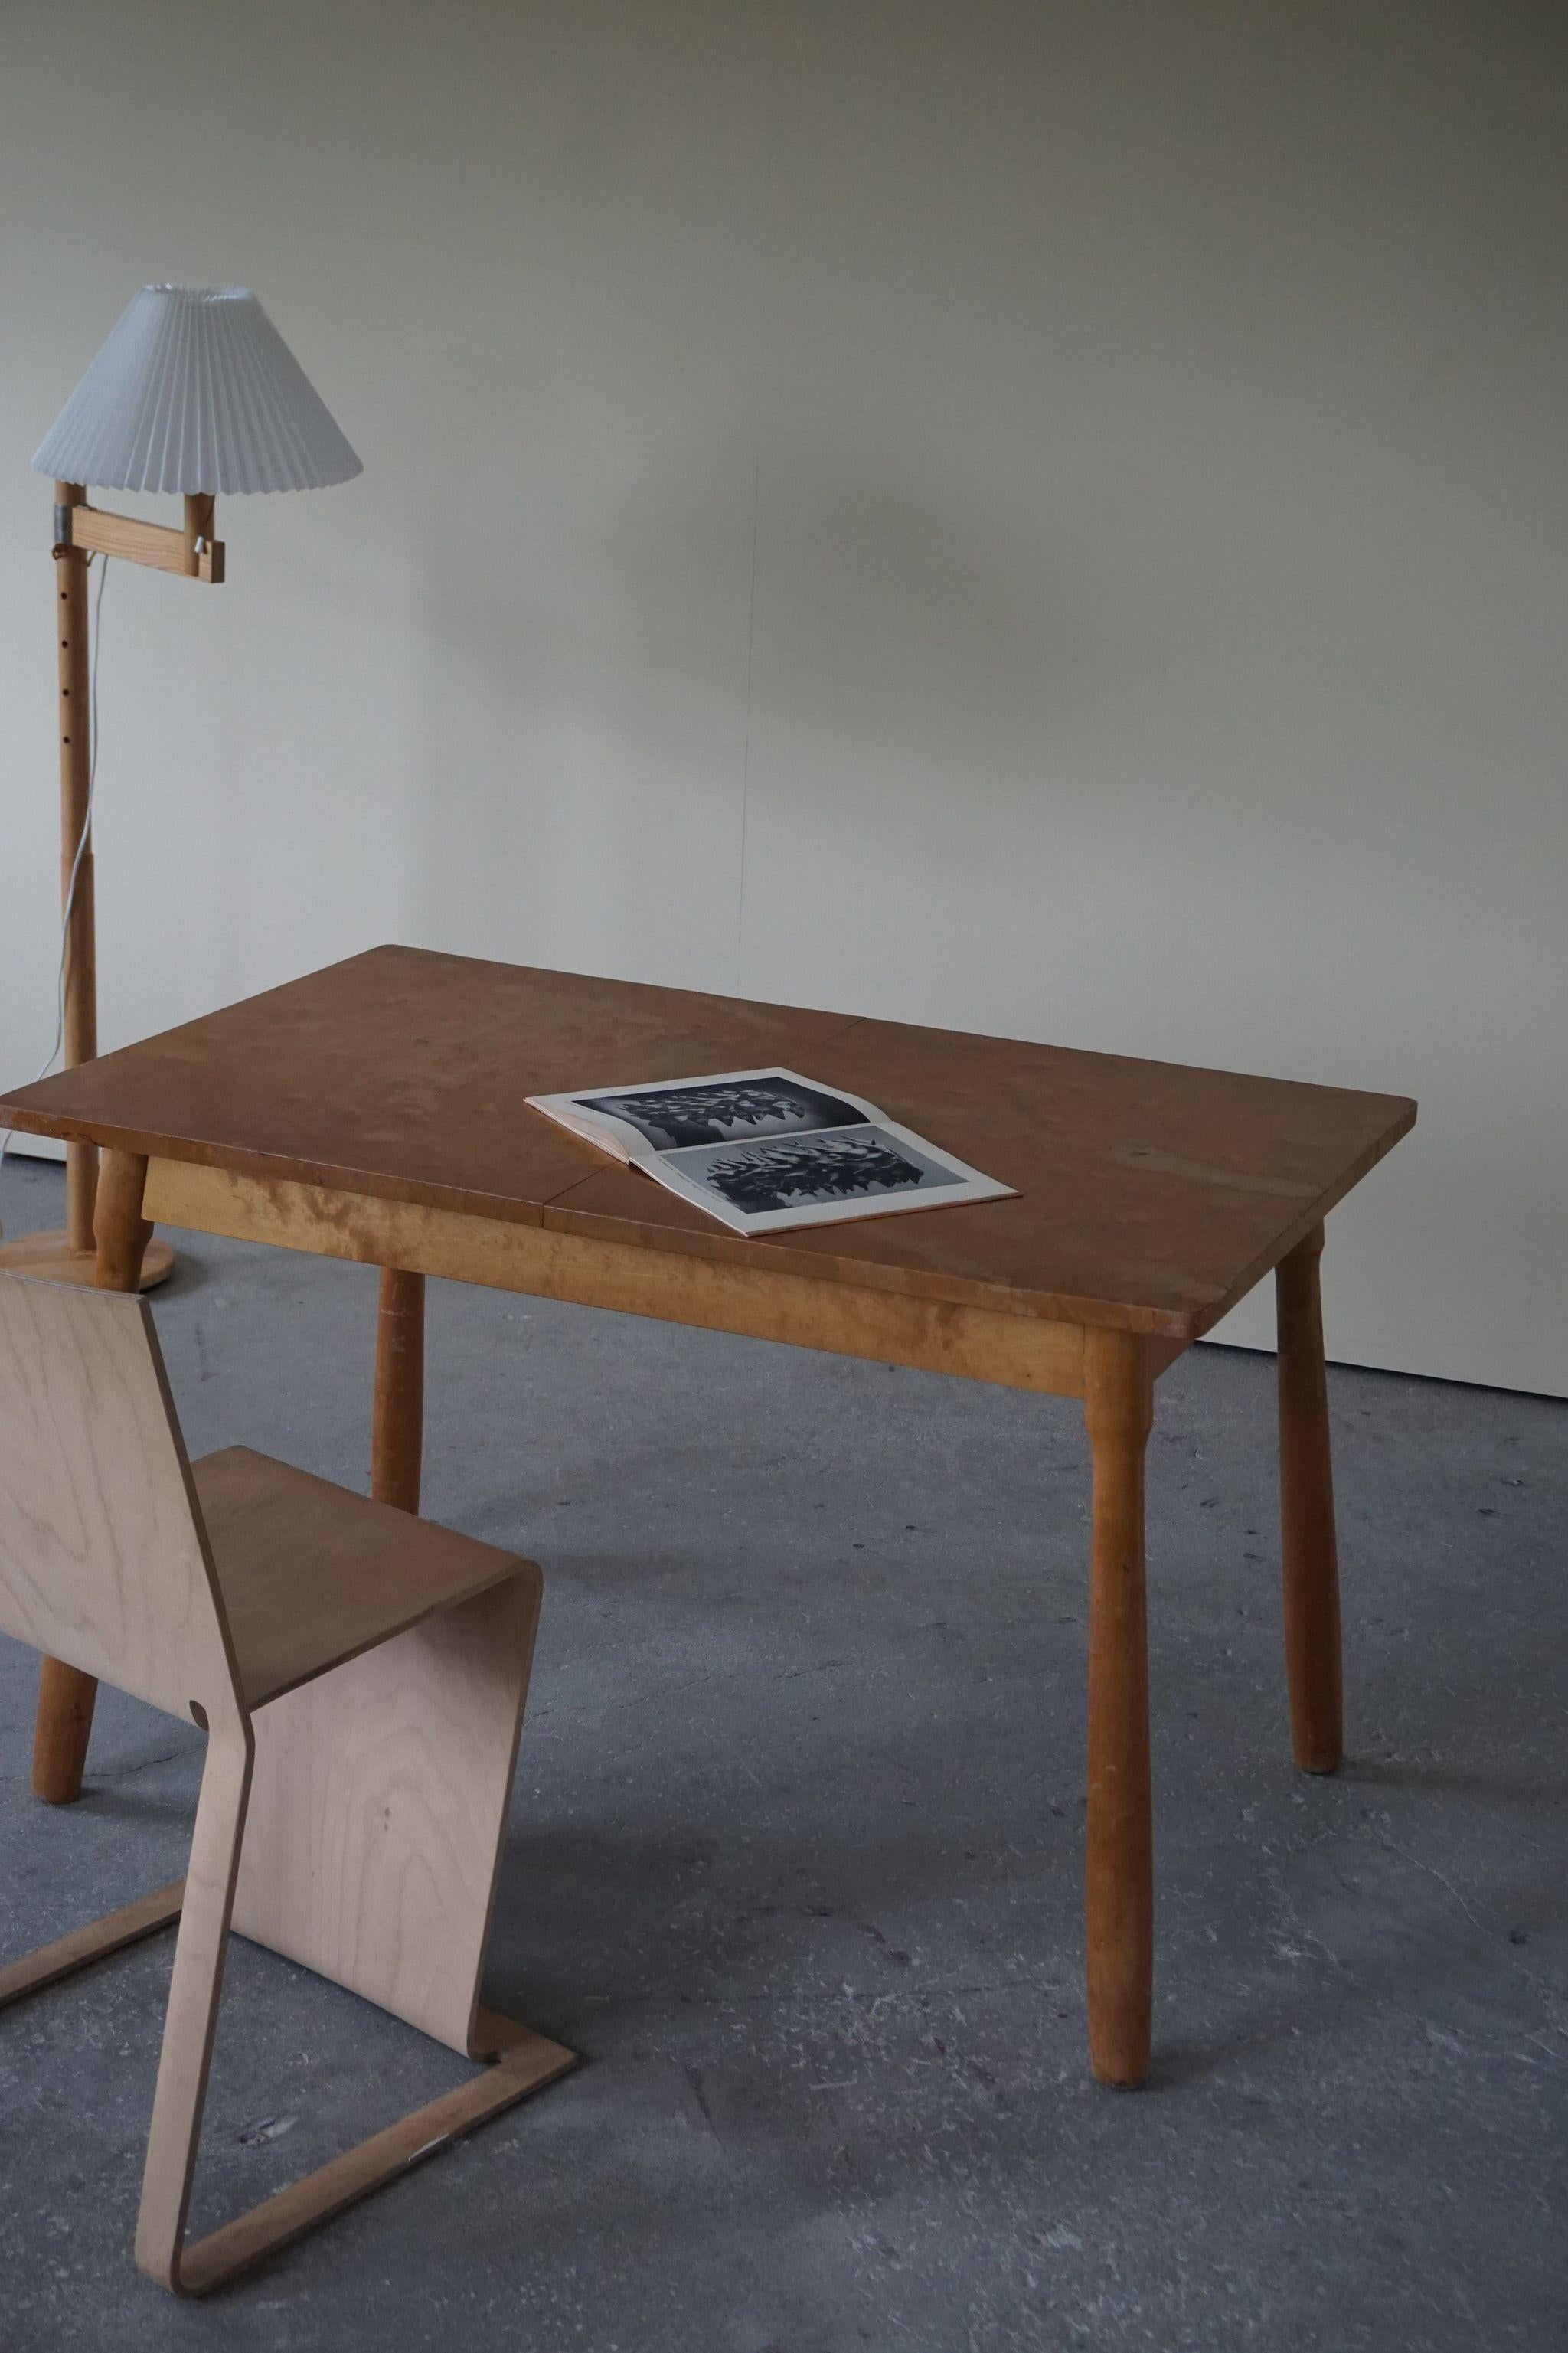 Danish Modern Desk / Dining Table in Birch Attributed to Philip Arctander, 1940s For Sale 4